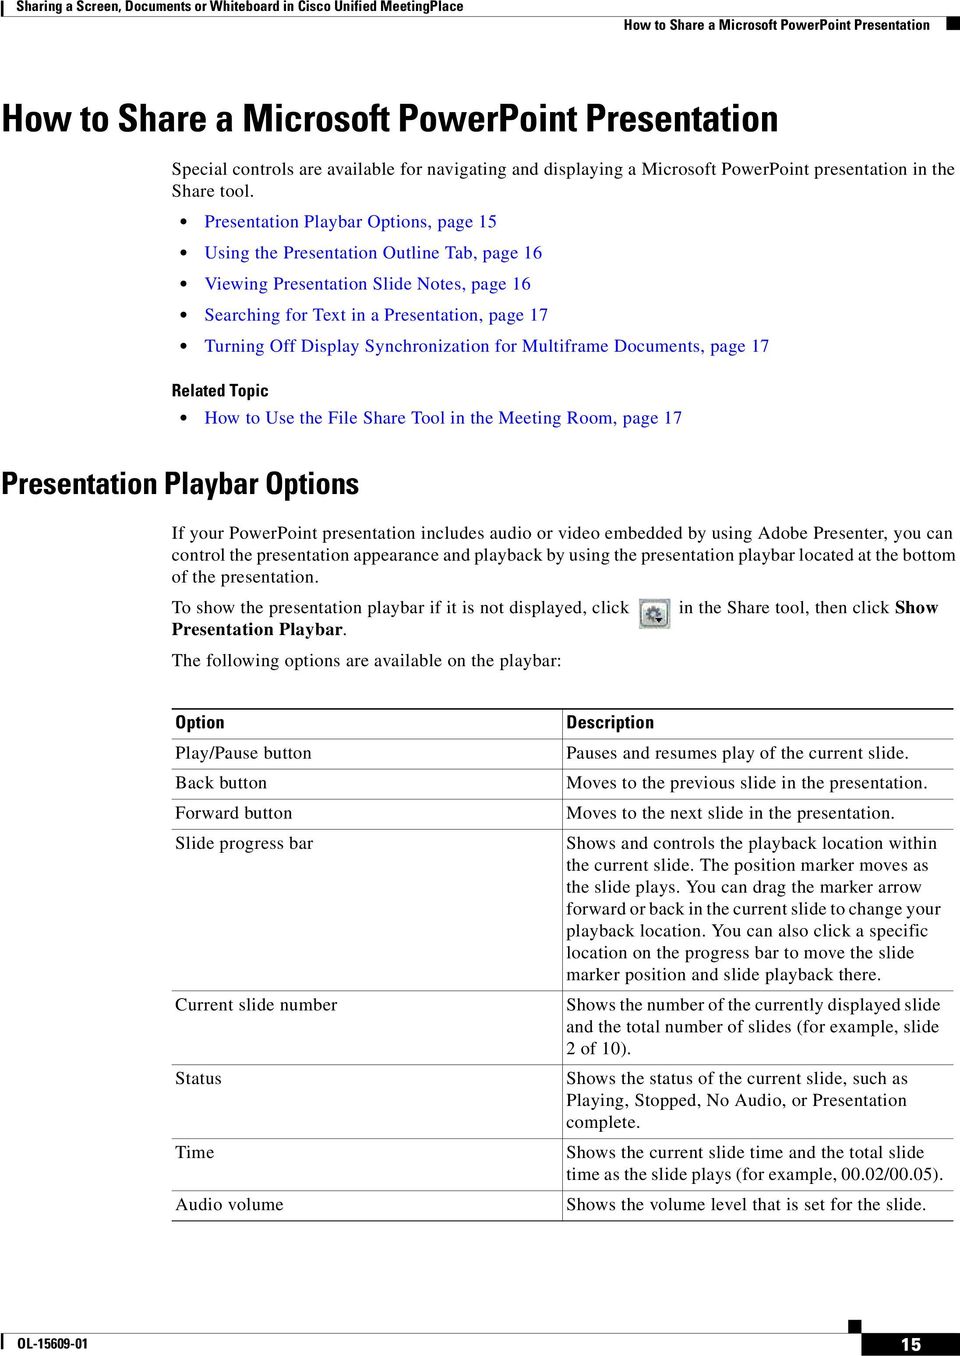 Presentation Playbar Options, page 15 Using the Presentation Outline Tab, page 16 Viewing Presentation Slide Notes, page 16 Searching for Text in a Presentation, page 17 Turning Off Display